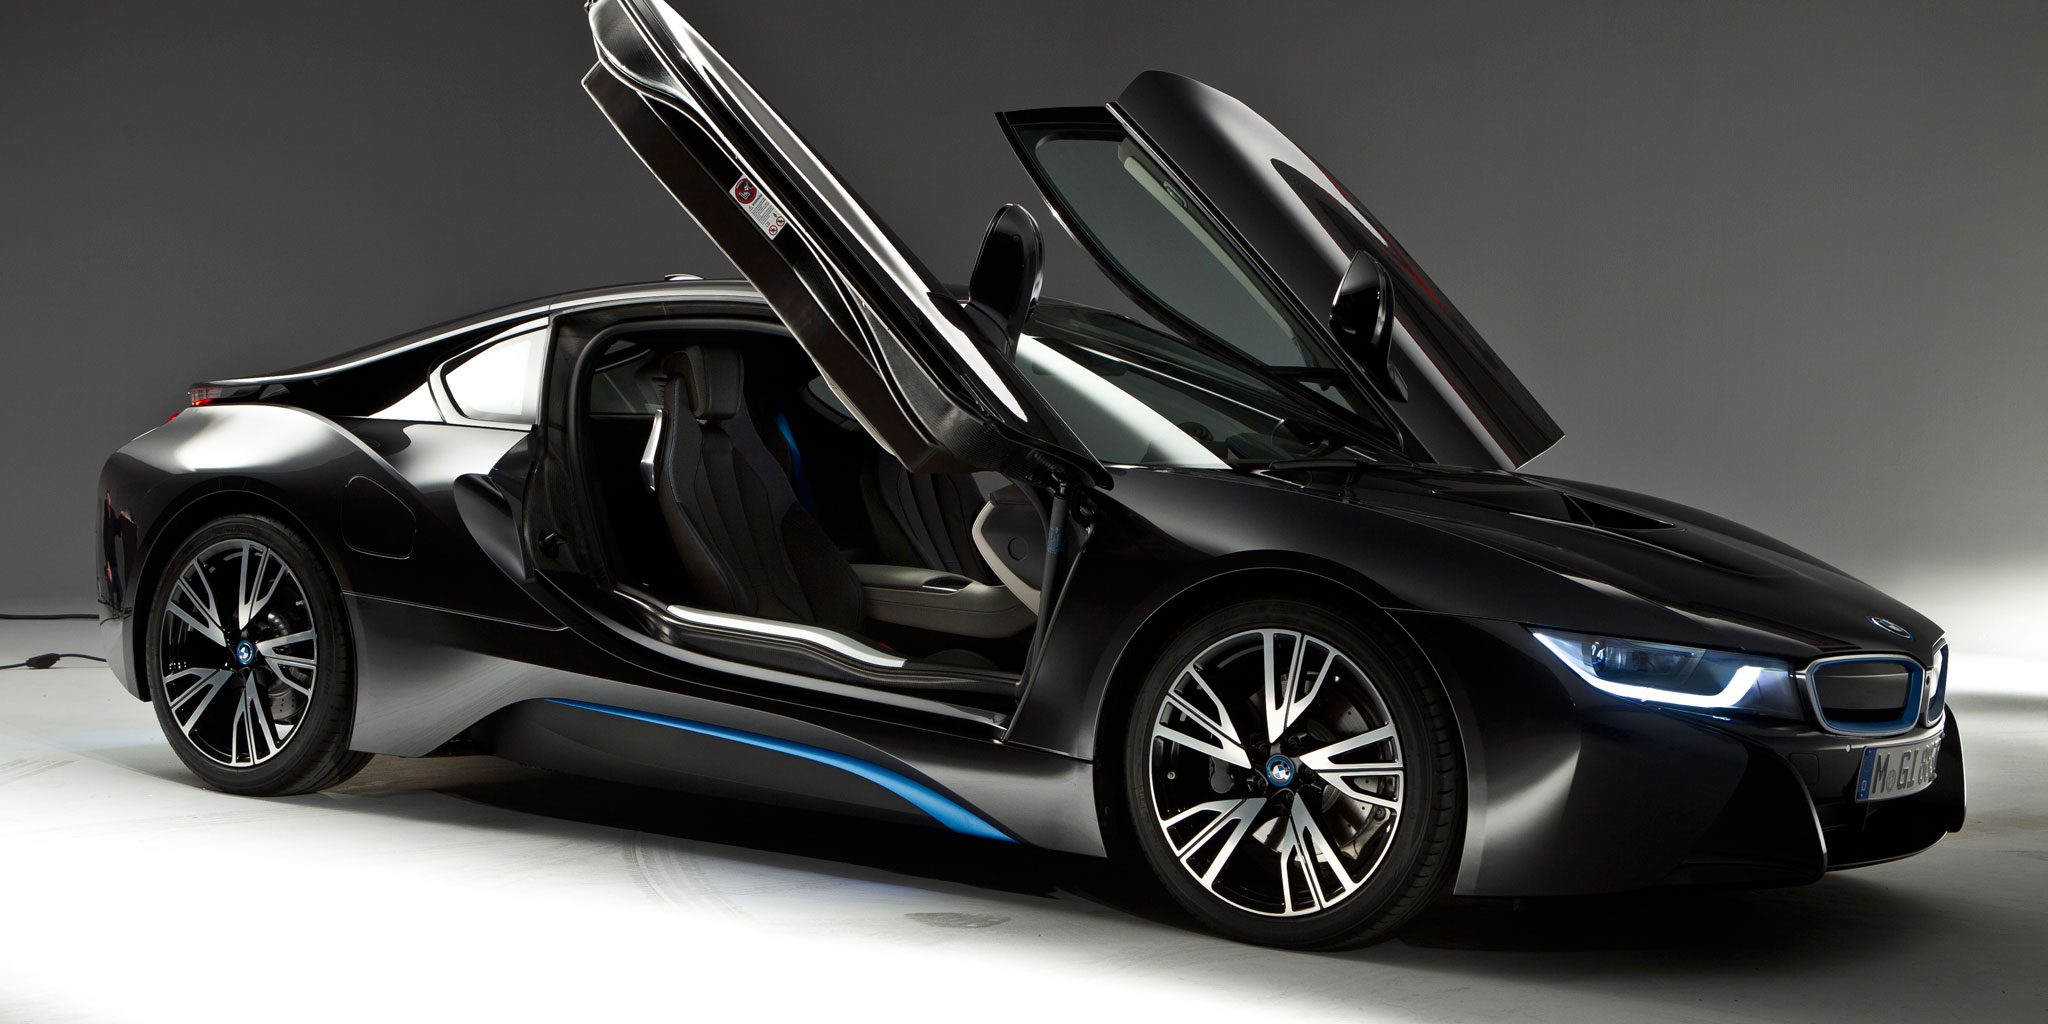 BMW is reportedly working on an allelectric version of the i8 with